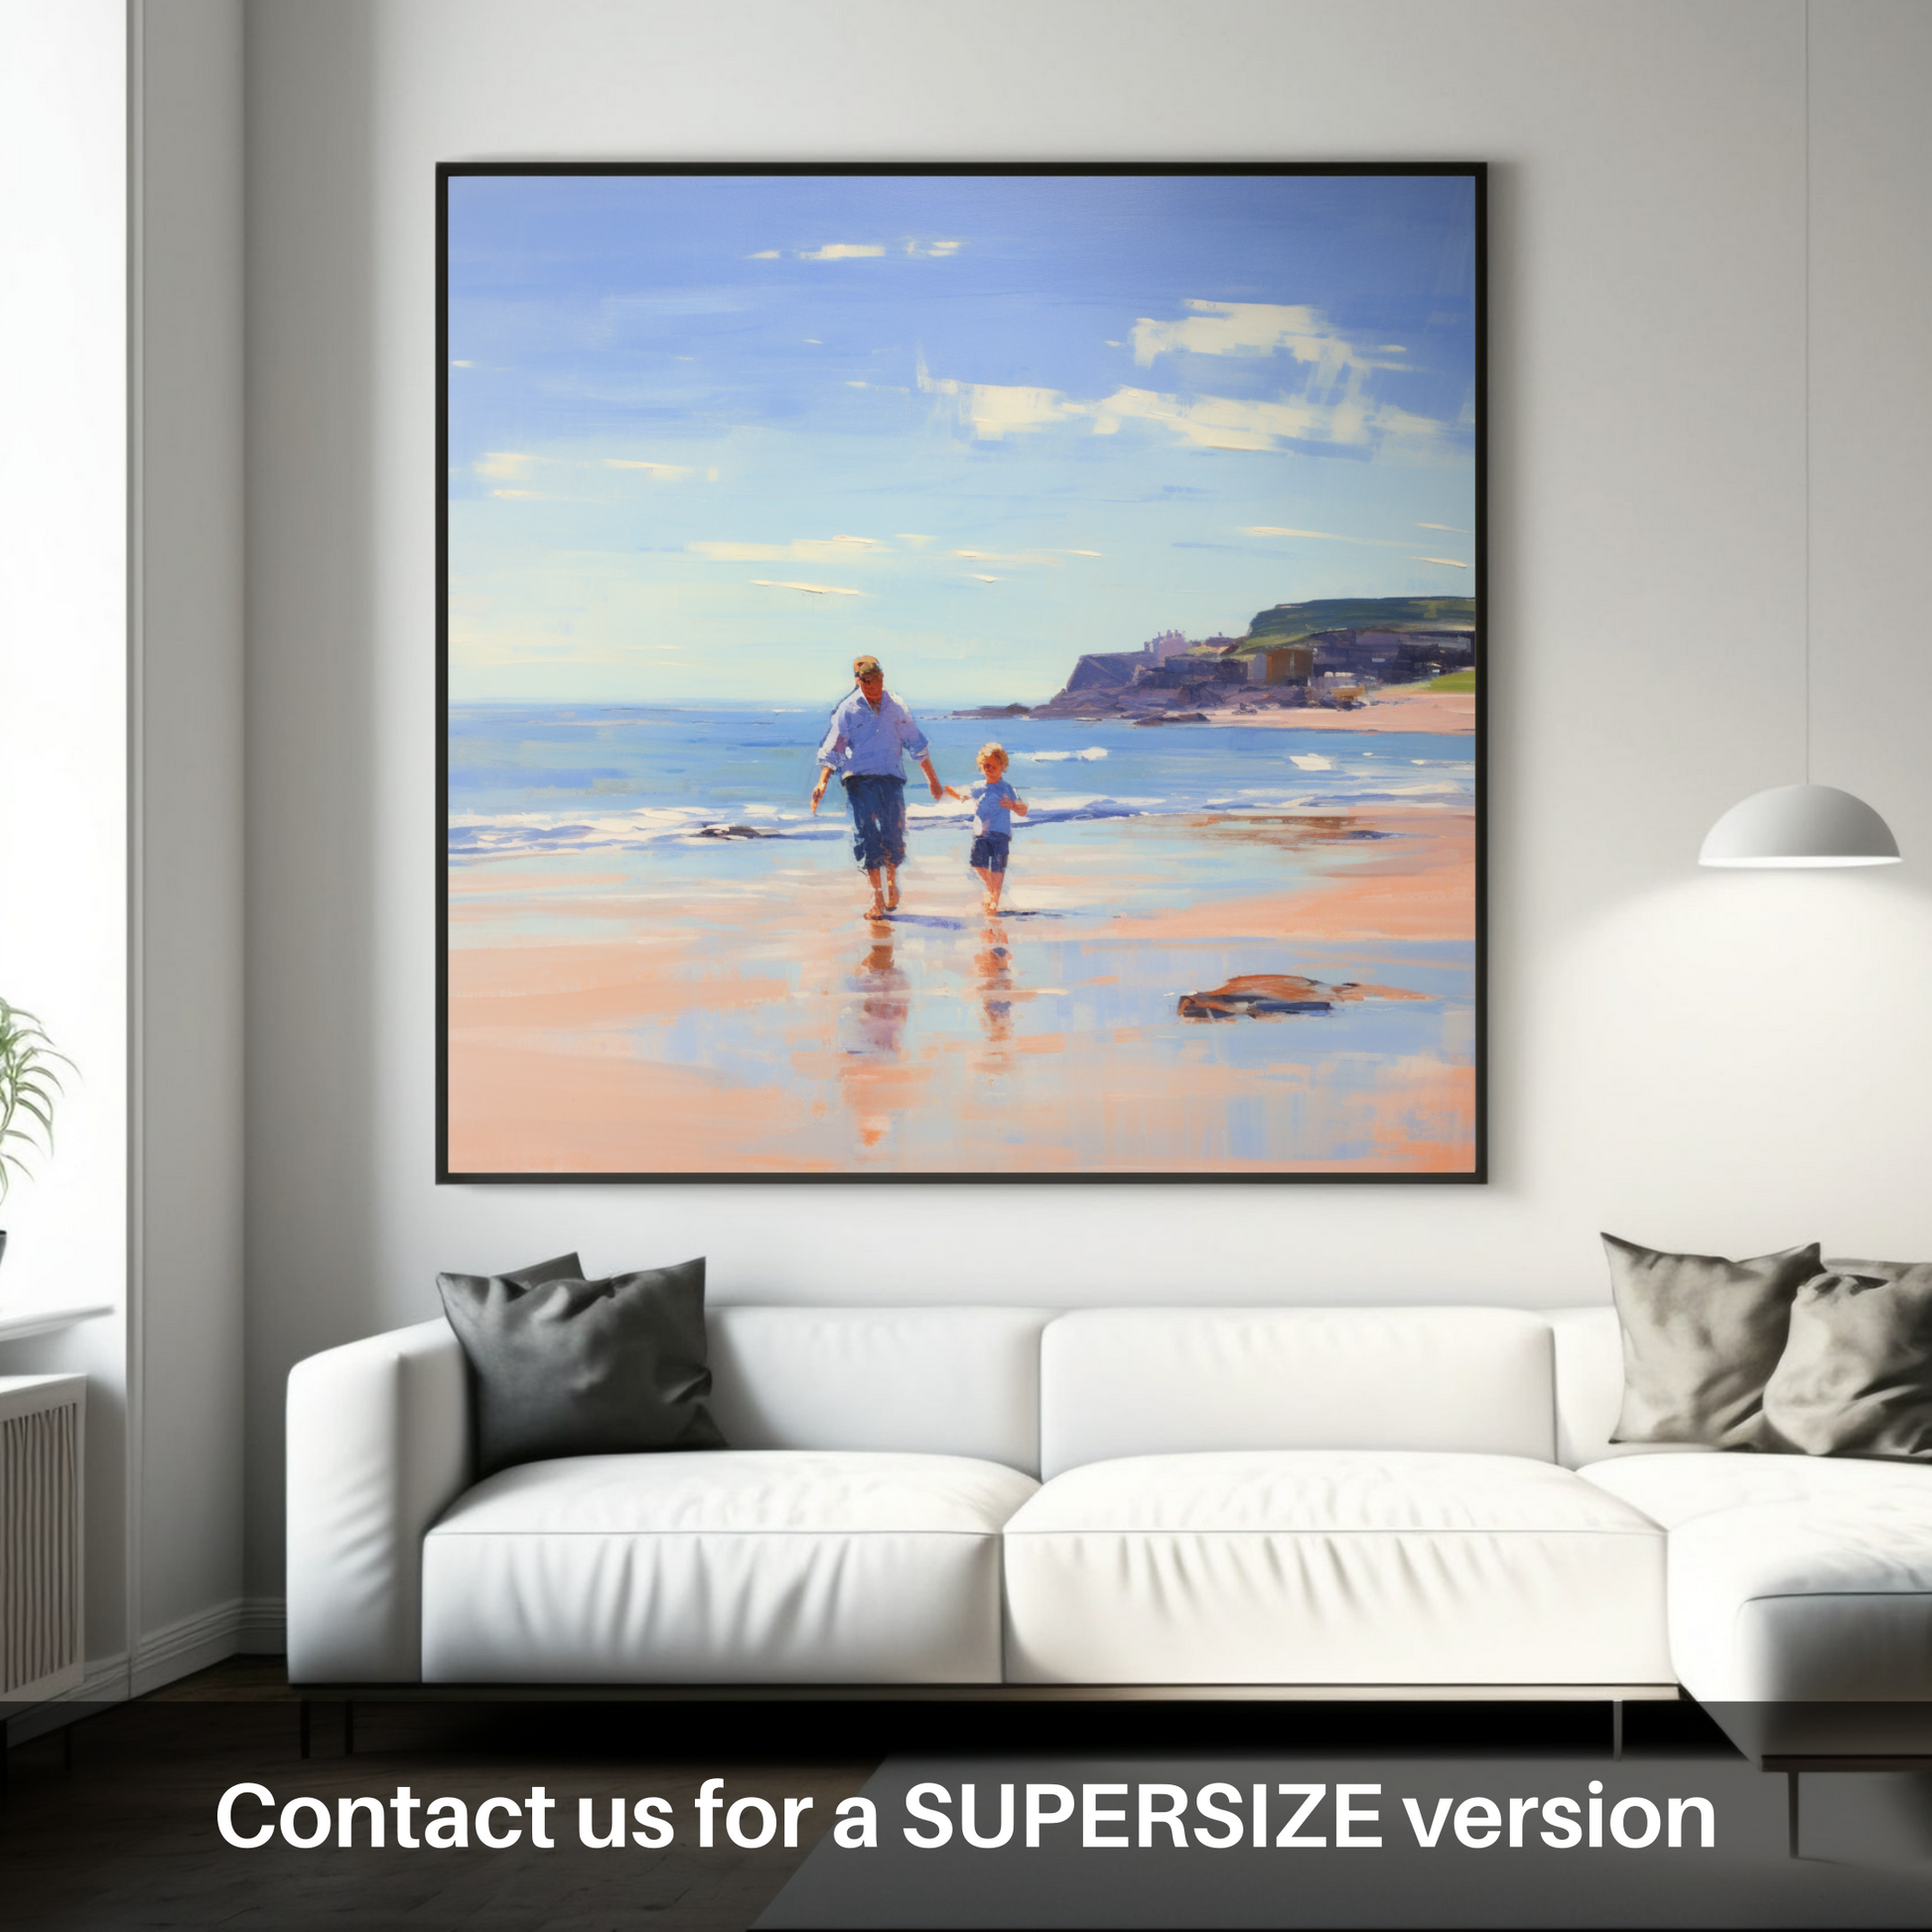 Huge supersize print of A dad and son walking on Coldingham Bay